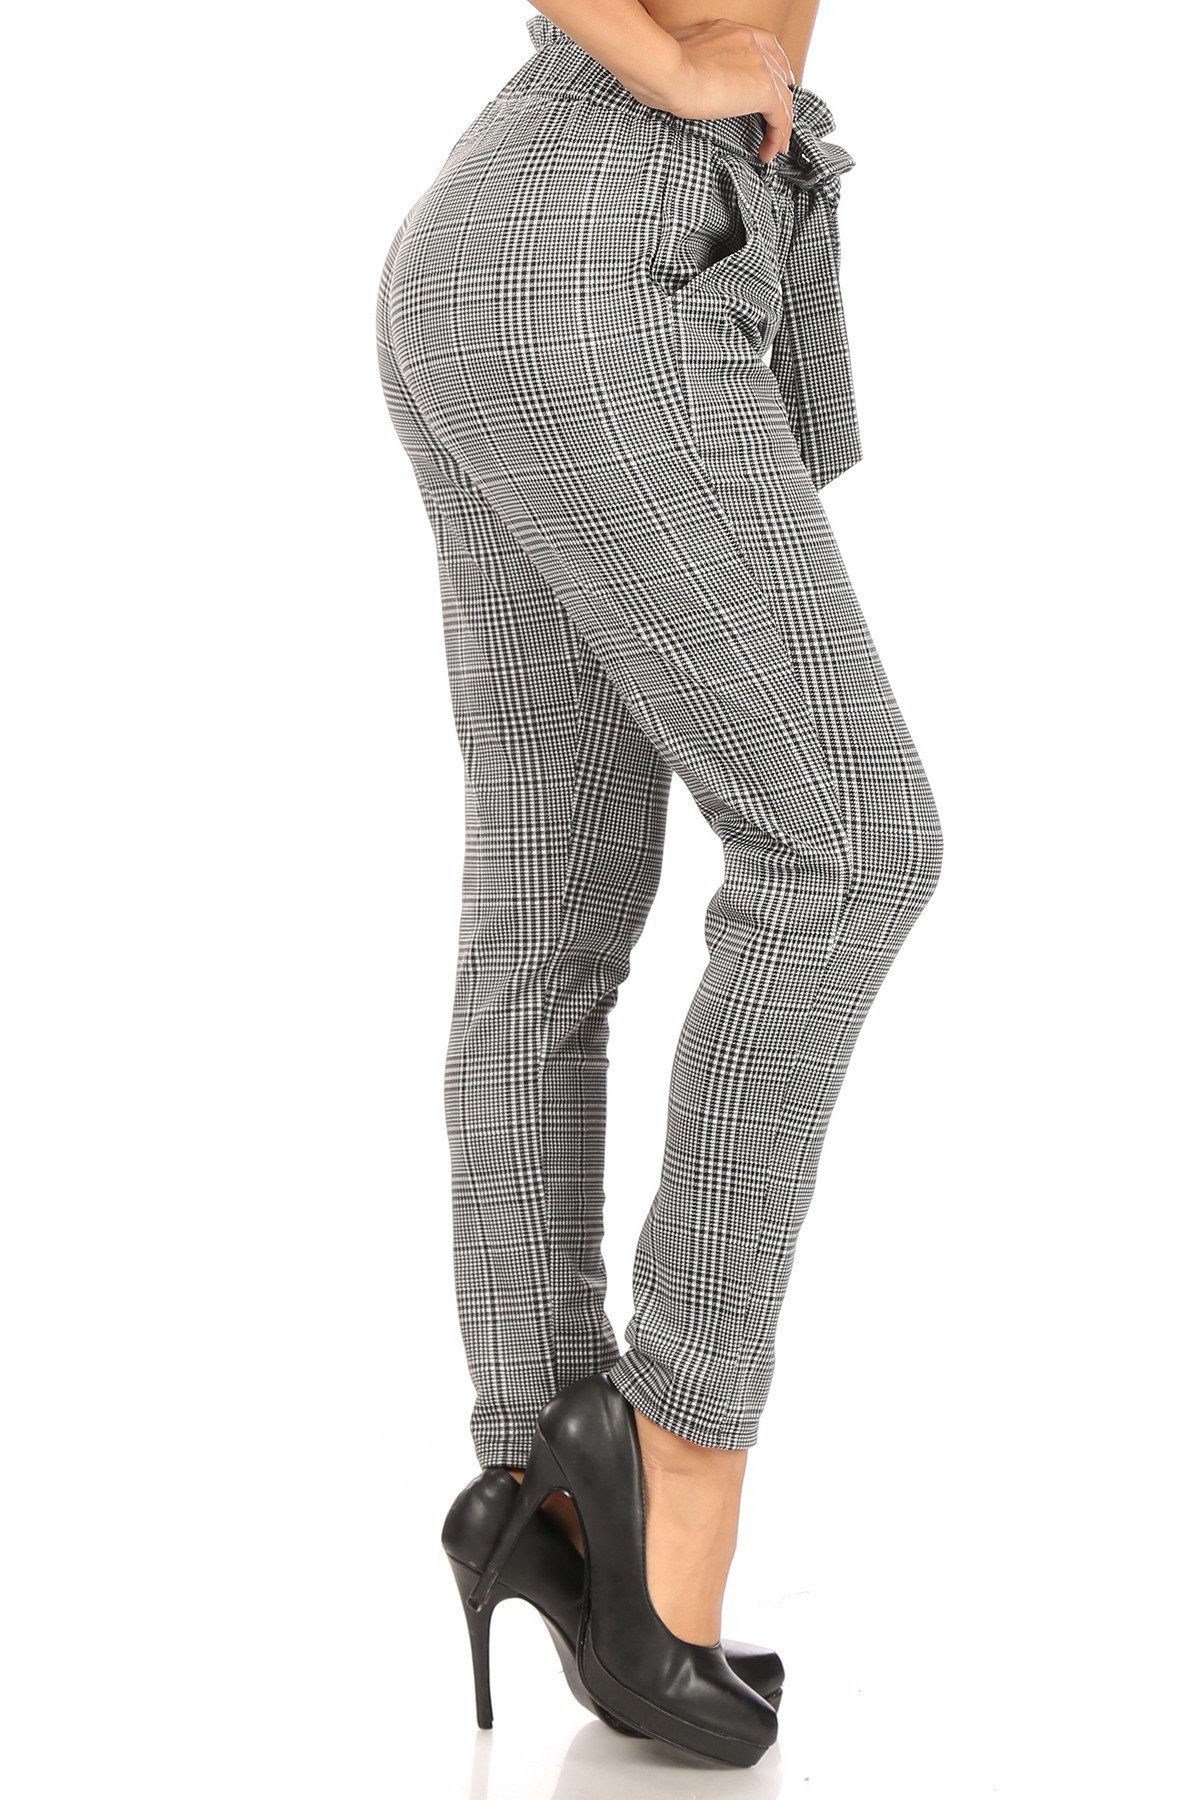 Wholesale Houndstooth Plaid High Waisted Paper Bag Tie Front Pants